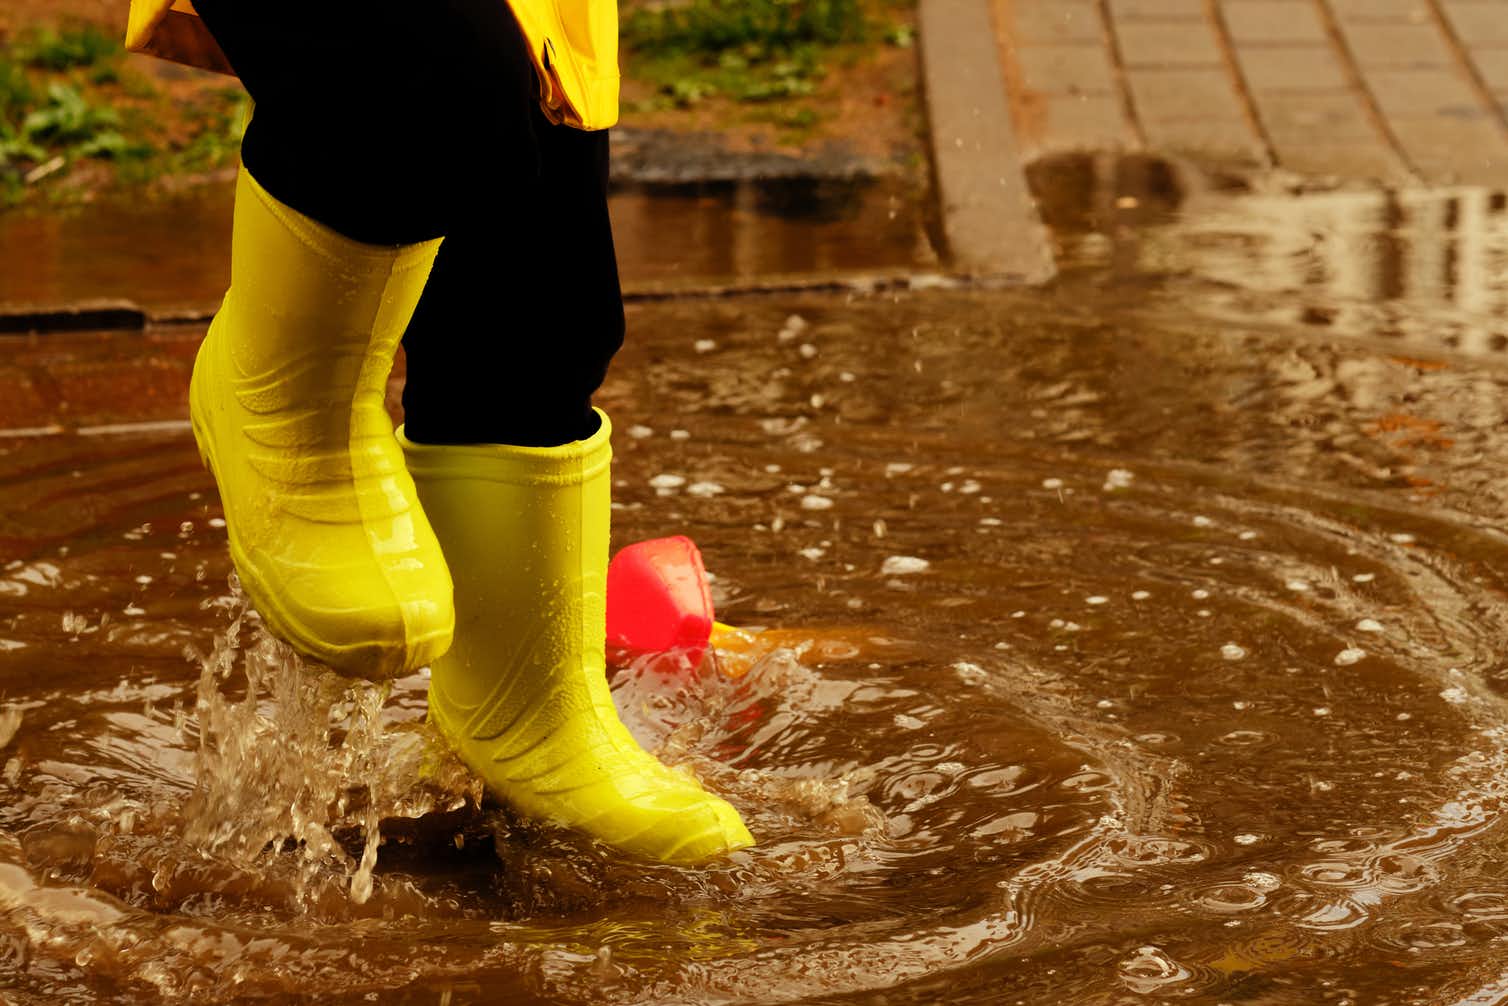 A child's legs, wearing yellow gumboots, splashing in a puddle.